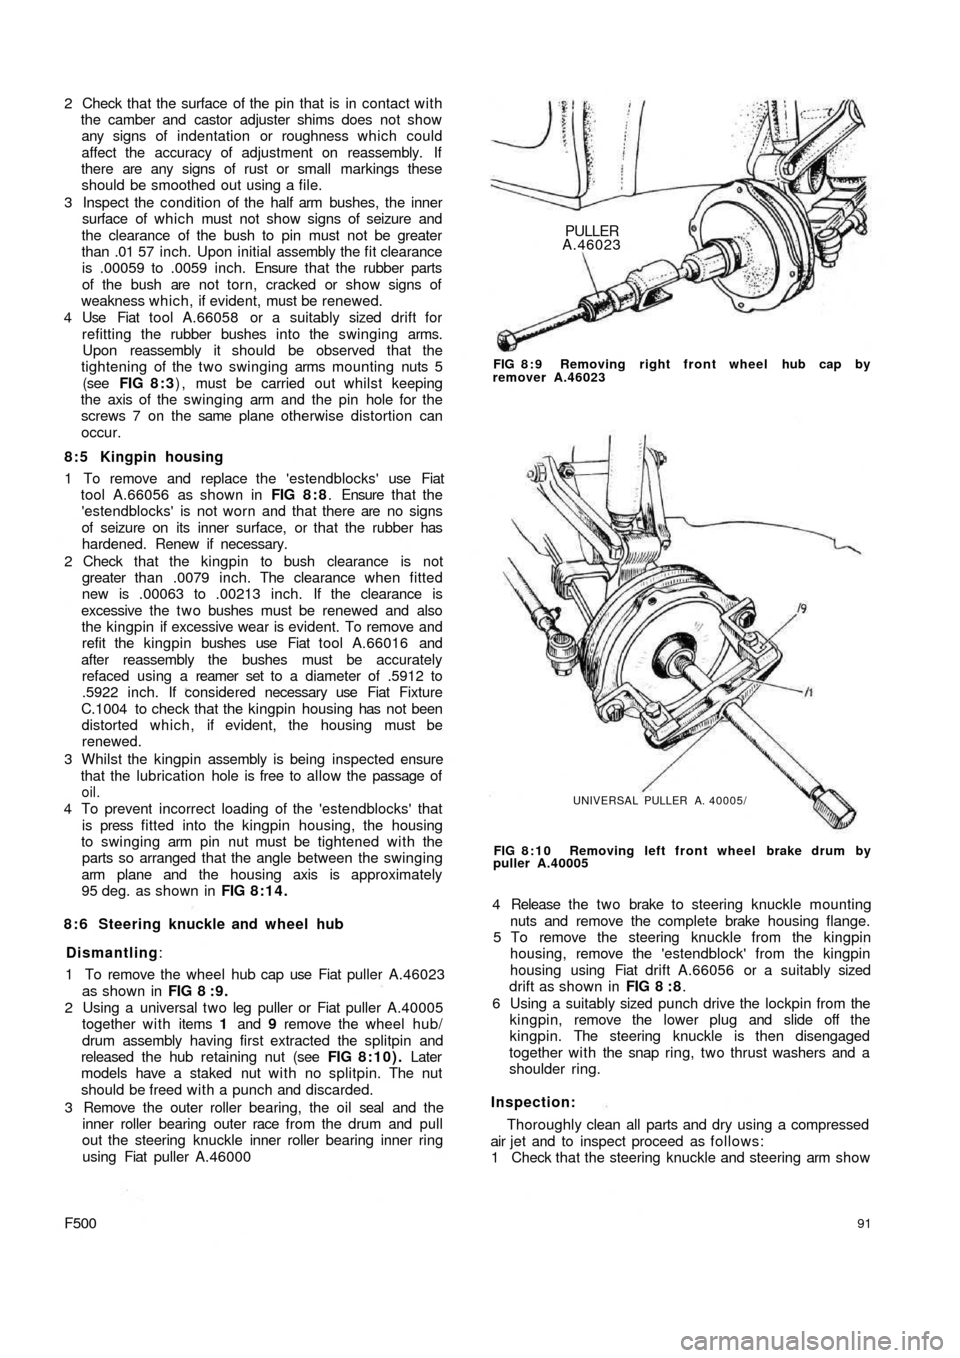 FIAT 500 1970 1.G Workshop Manual 2  Check that the surface of the pin that is in contact with
the camber and castor adjuster shims does not show
any signs of indentation or roughness which could
affect the  accuracy of adjustment on 